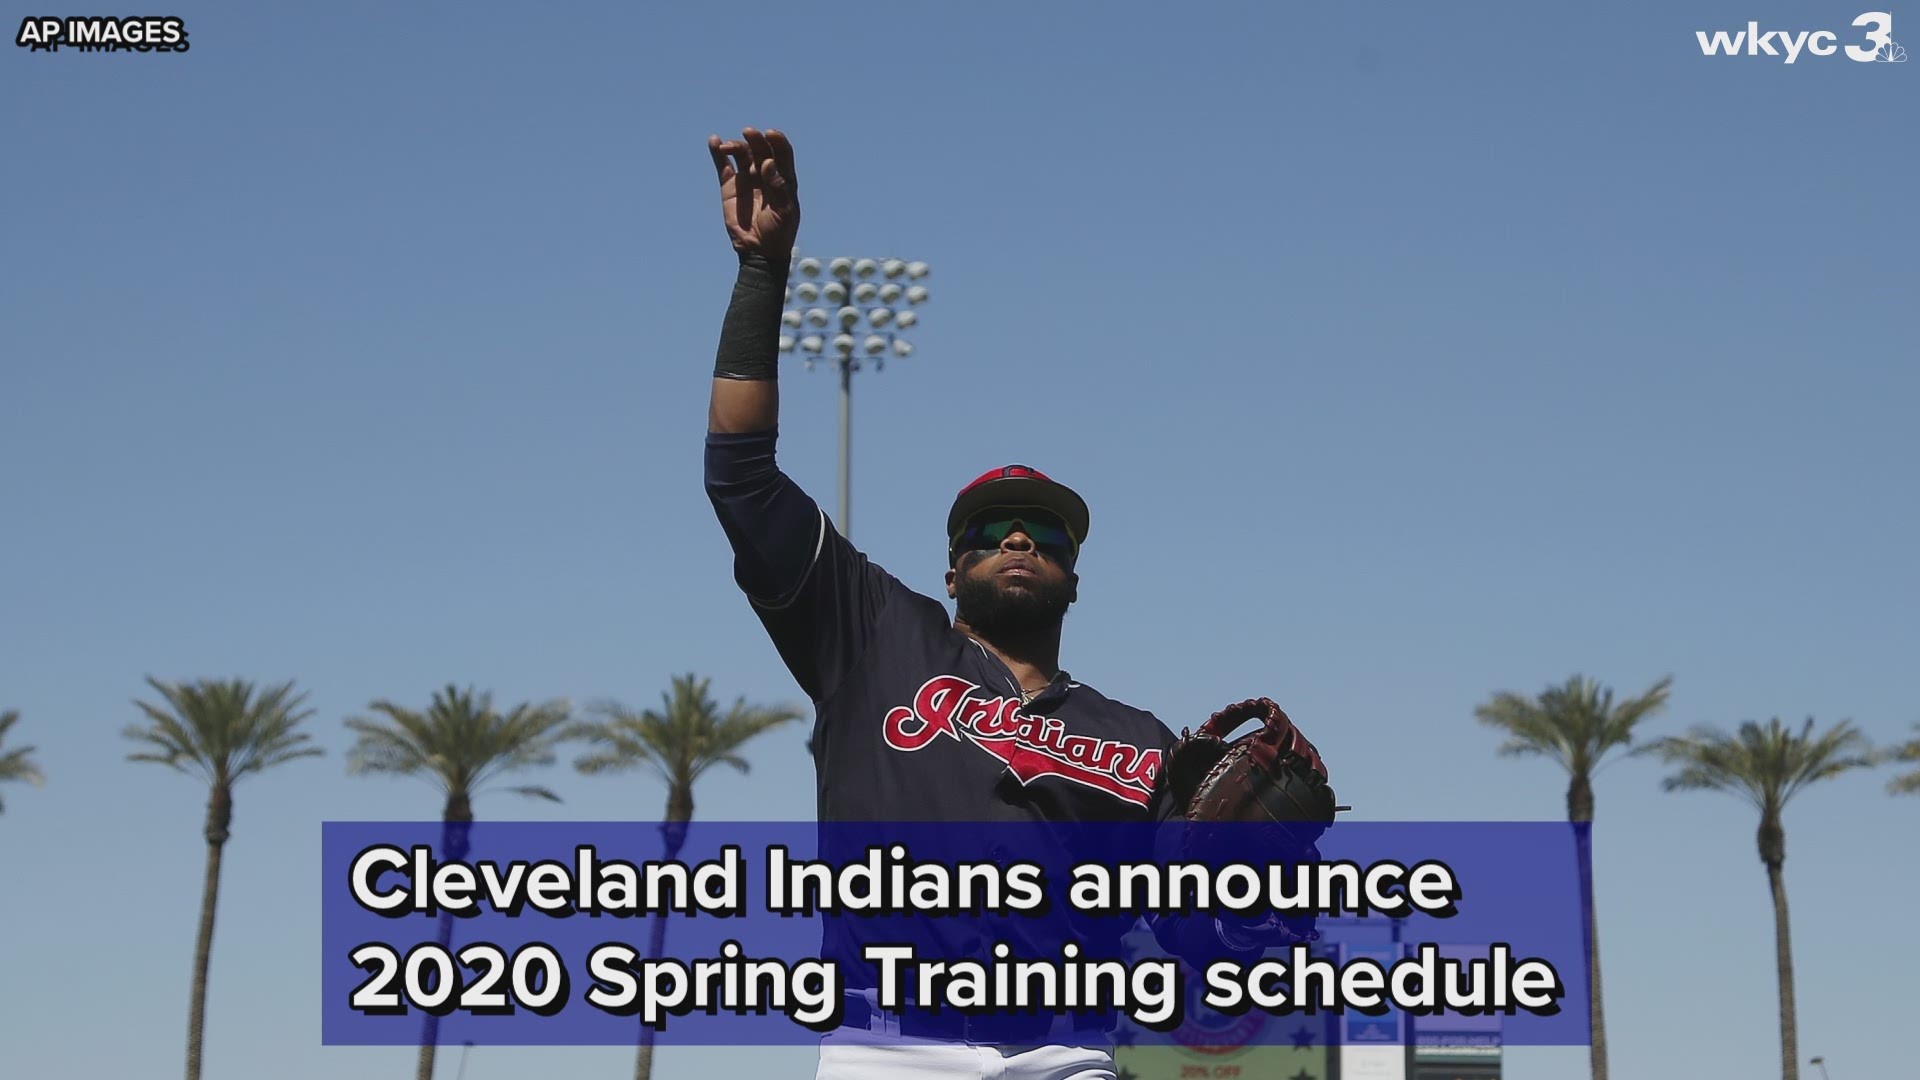 On Monday, the Cleveland Indians announced their 2020 Spring Training schedule.